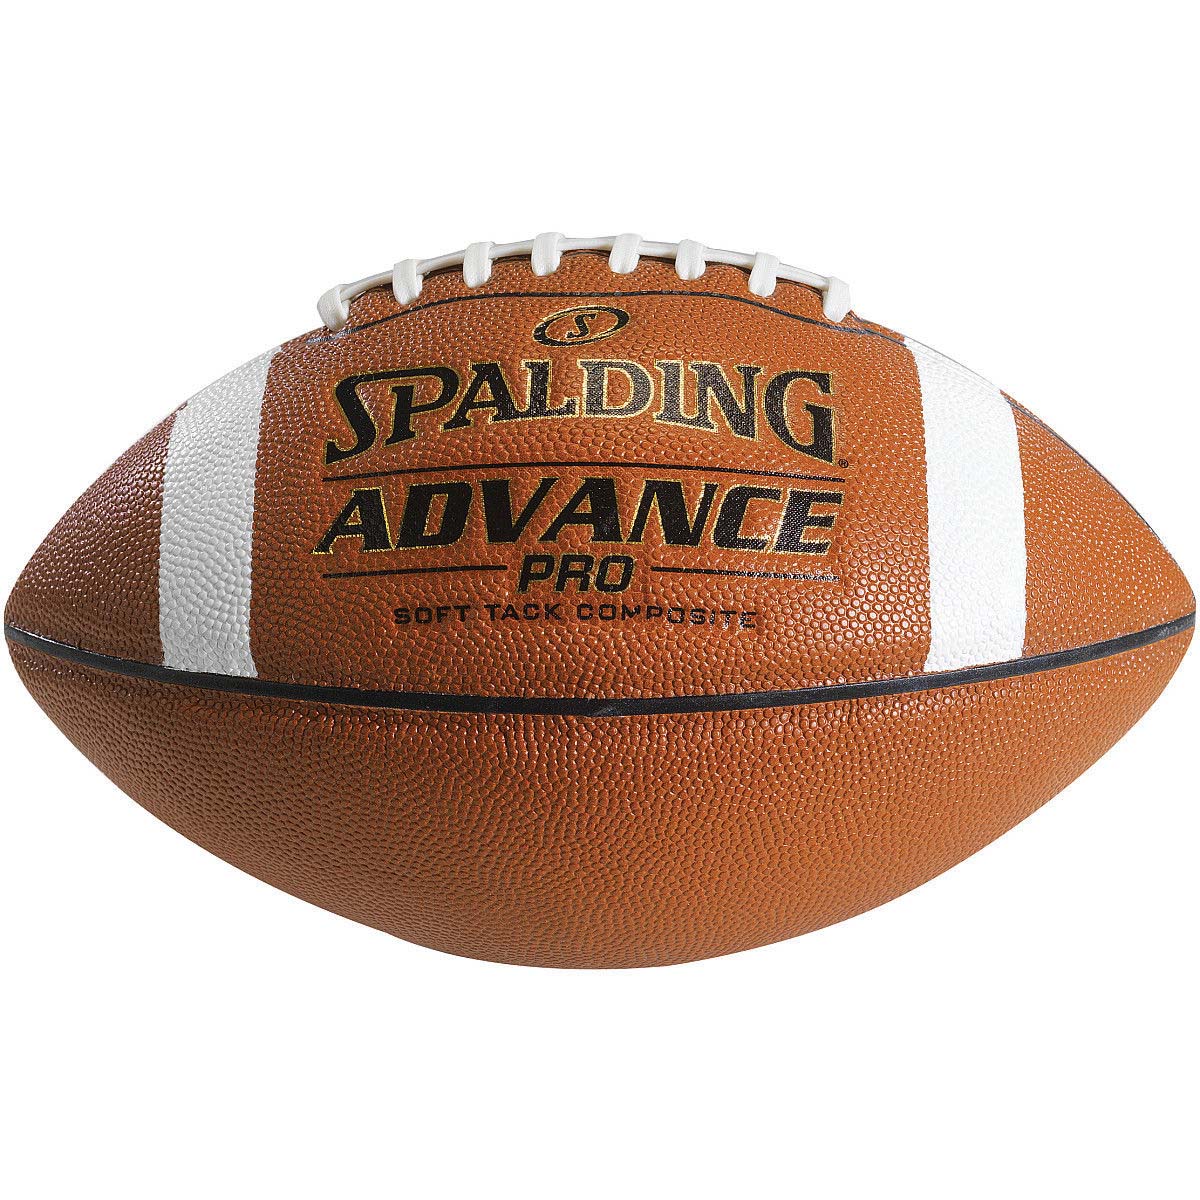 Spalding Advanced Pro Soft Tack Football Official Size 9 - Ages 14+